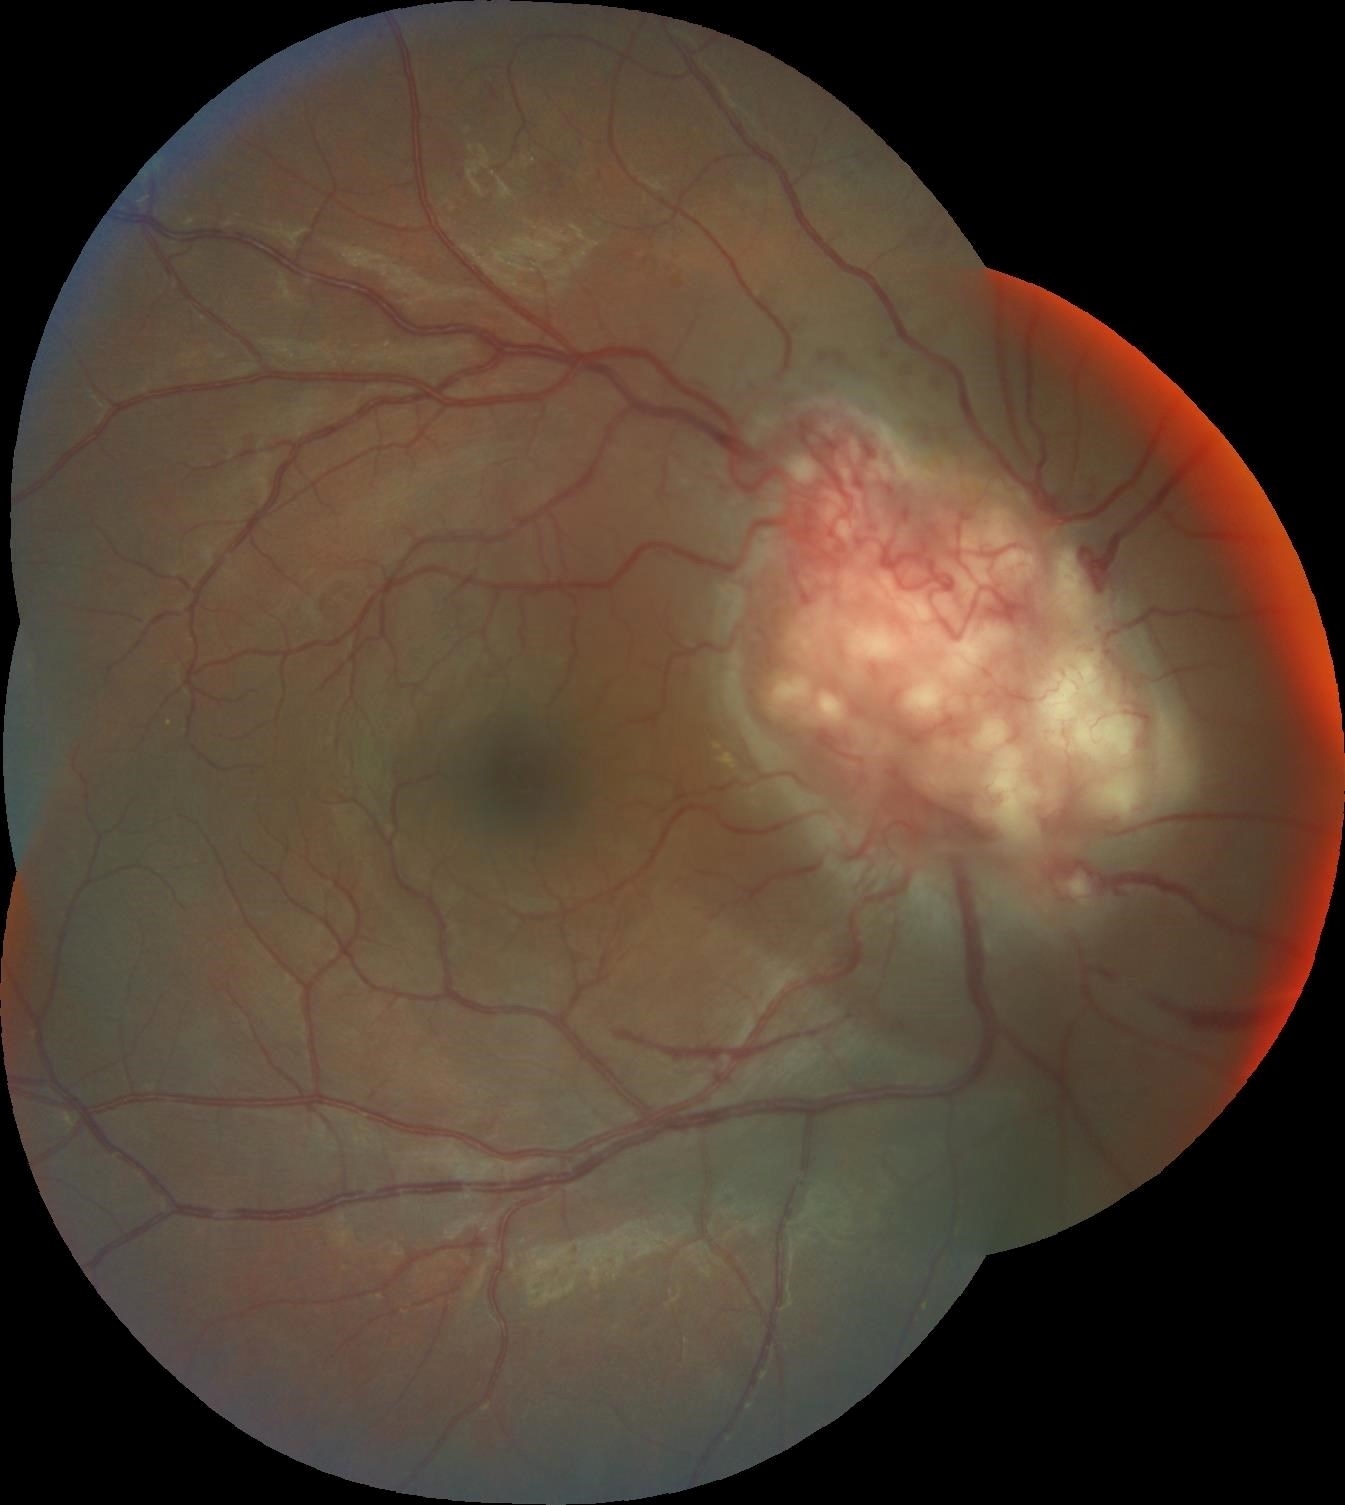 A 25-year-old African American male presented with signs and symptoms of panuveitis in the left eye. His right eye was asymptomatic, yet dilated evaluation revealed an infiltrative optic nerve head mass. Further systemic workup, including chest x-ray and MRI of the brain and orbits, revealed widespread nodular opacities throughout the lungs and brain consistent with sarcoidosis. 